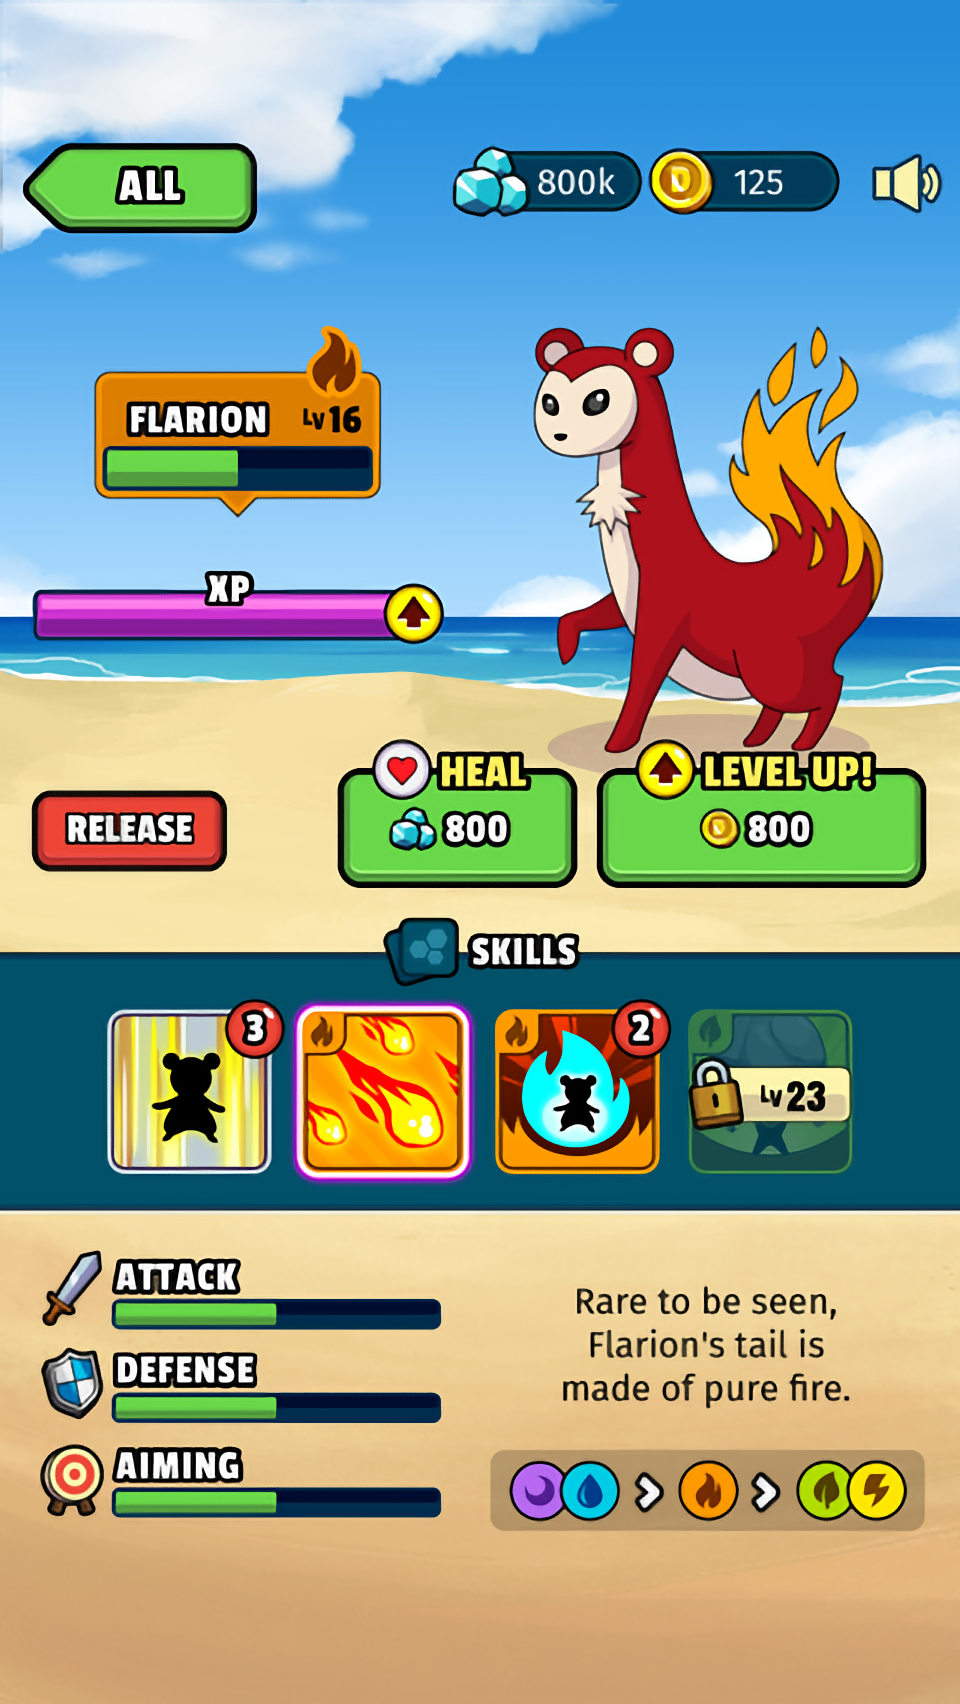 Screenshot showing a detailed view of a Dynamon called Flarion, listing abilities and stats